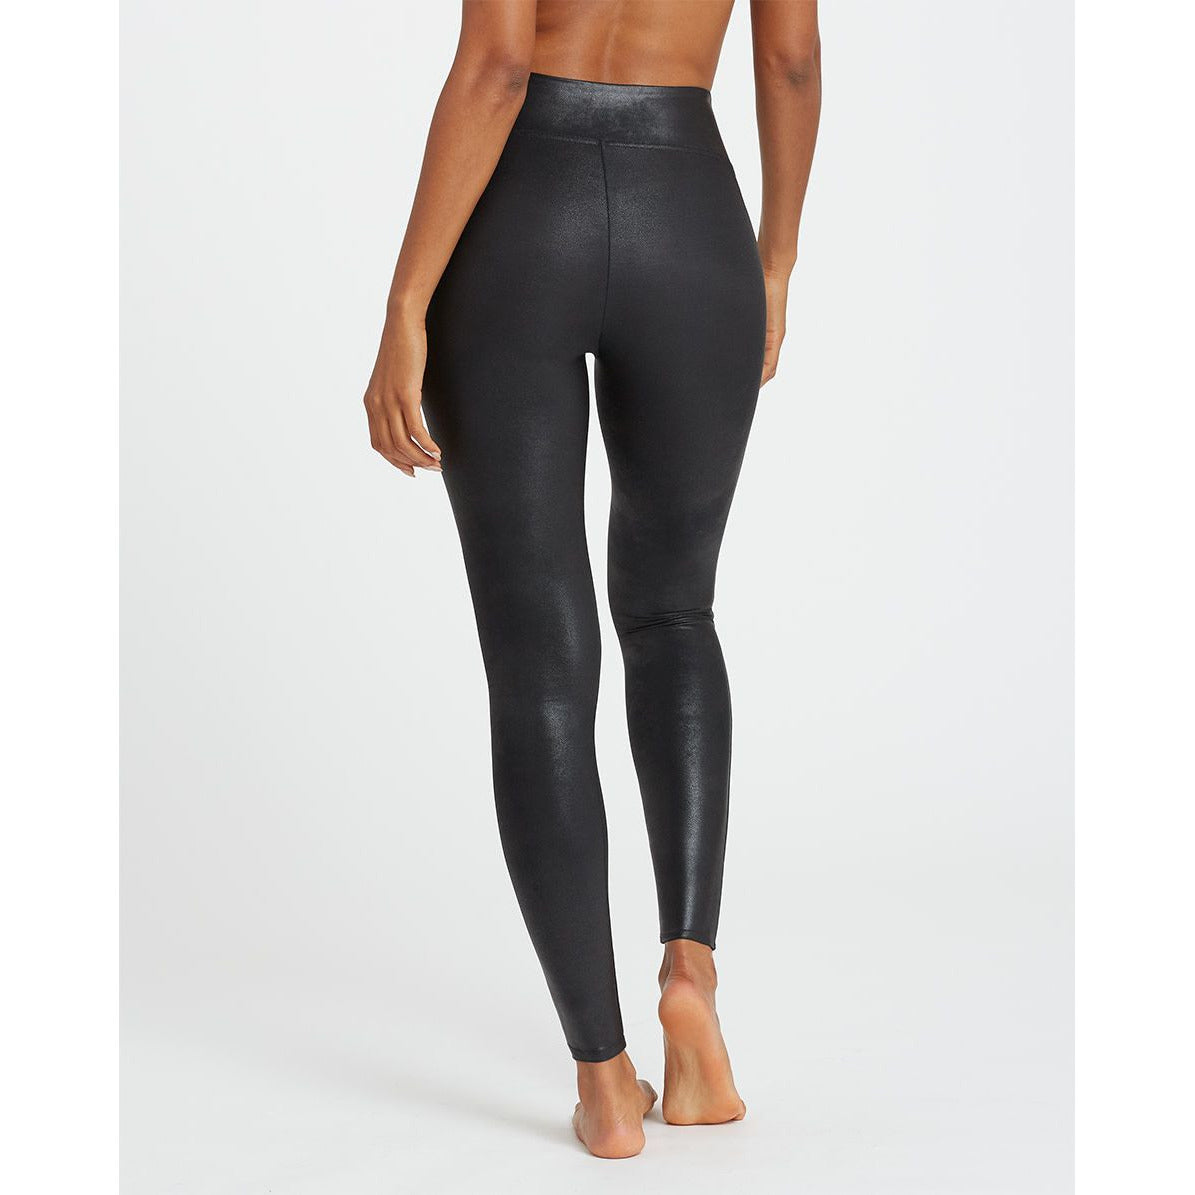 SPANX FAUX LEATHER LEGGINGS - Steve's on the Square